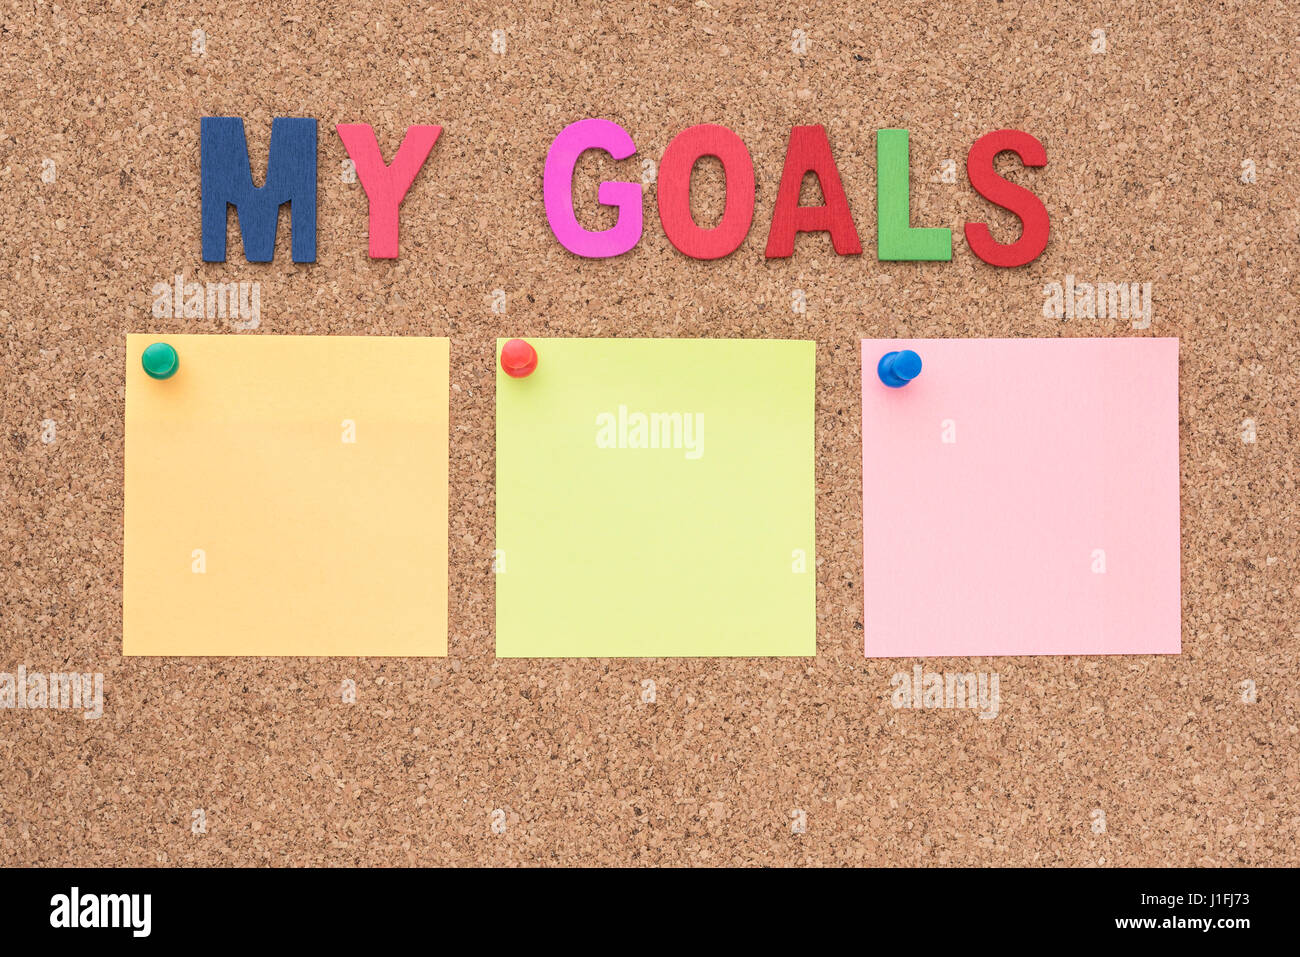 Words My Goals And Target Notepad With Copy Space Background Smart Goal And Success Concept For Business Stock Photo Alamy